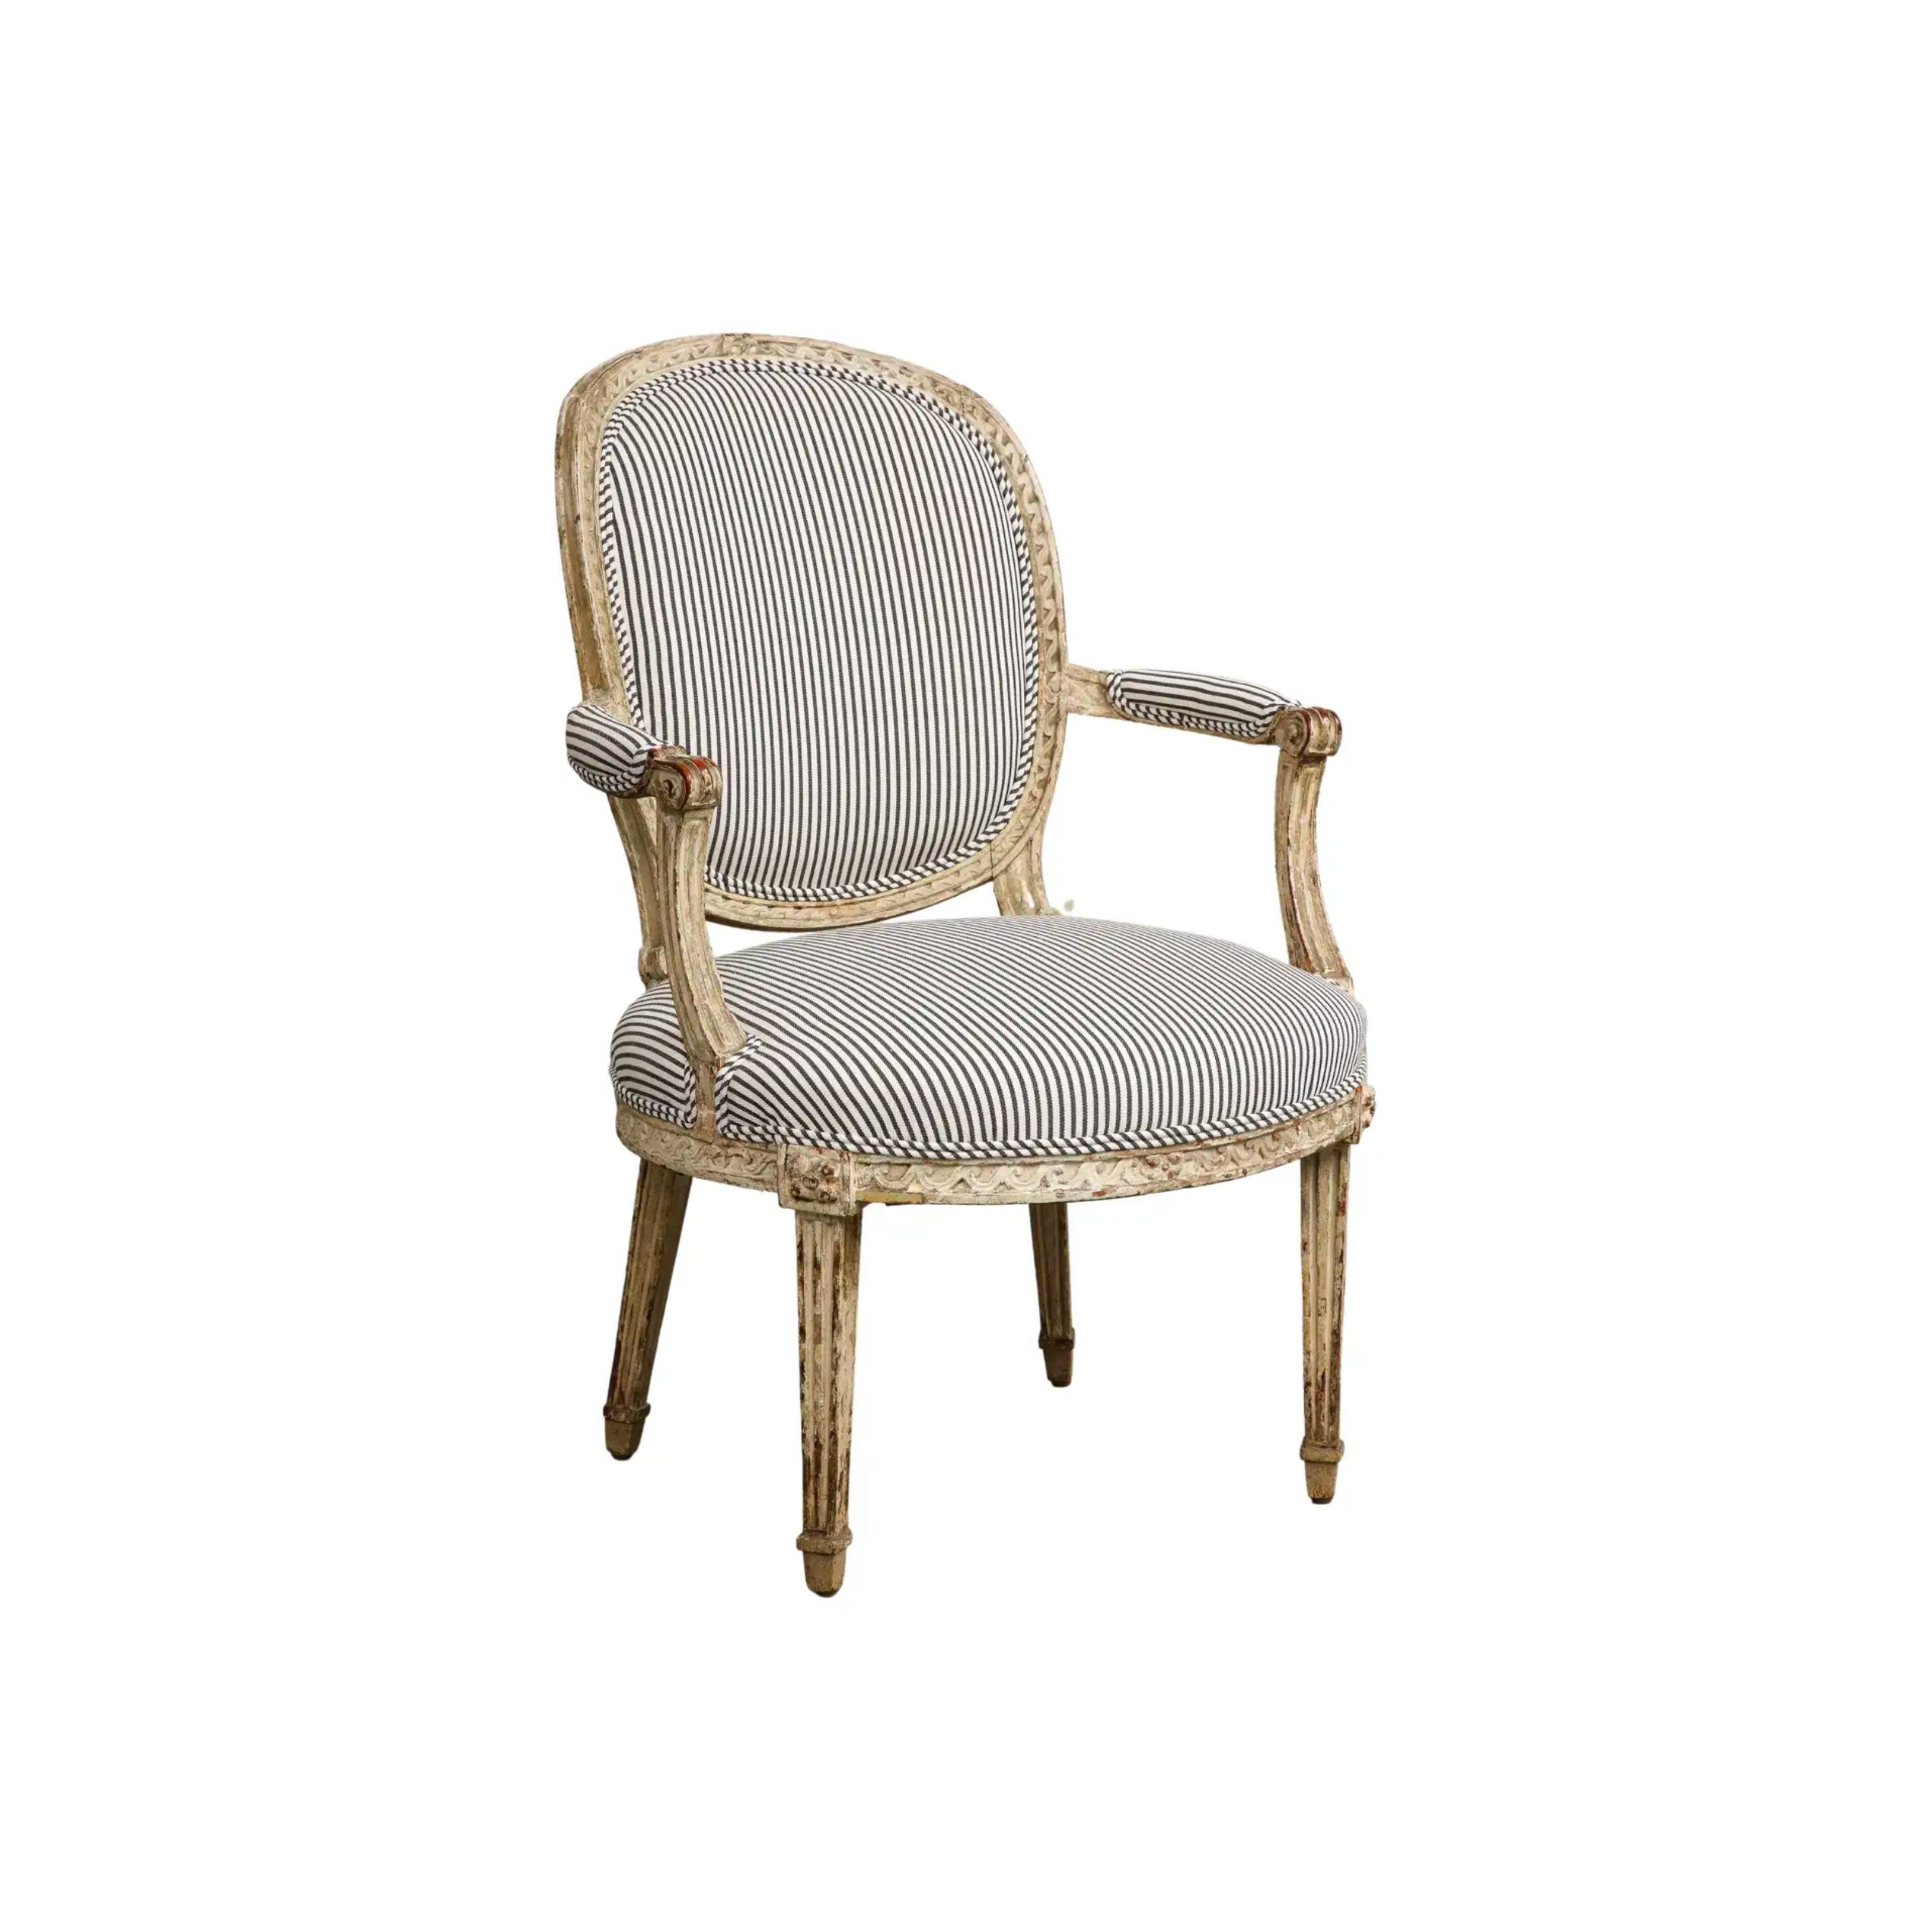 1870s Louis XVI Style Ebonized Fauteuil in Upholstered Linen – Lee